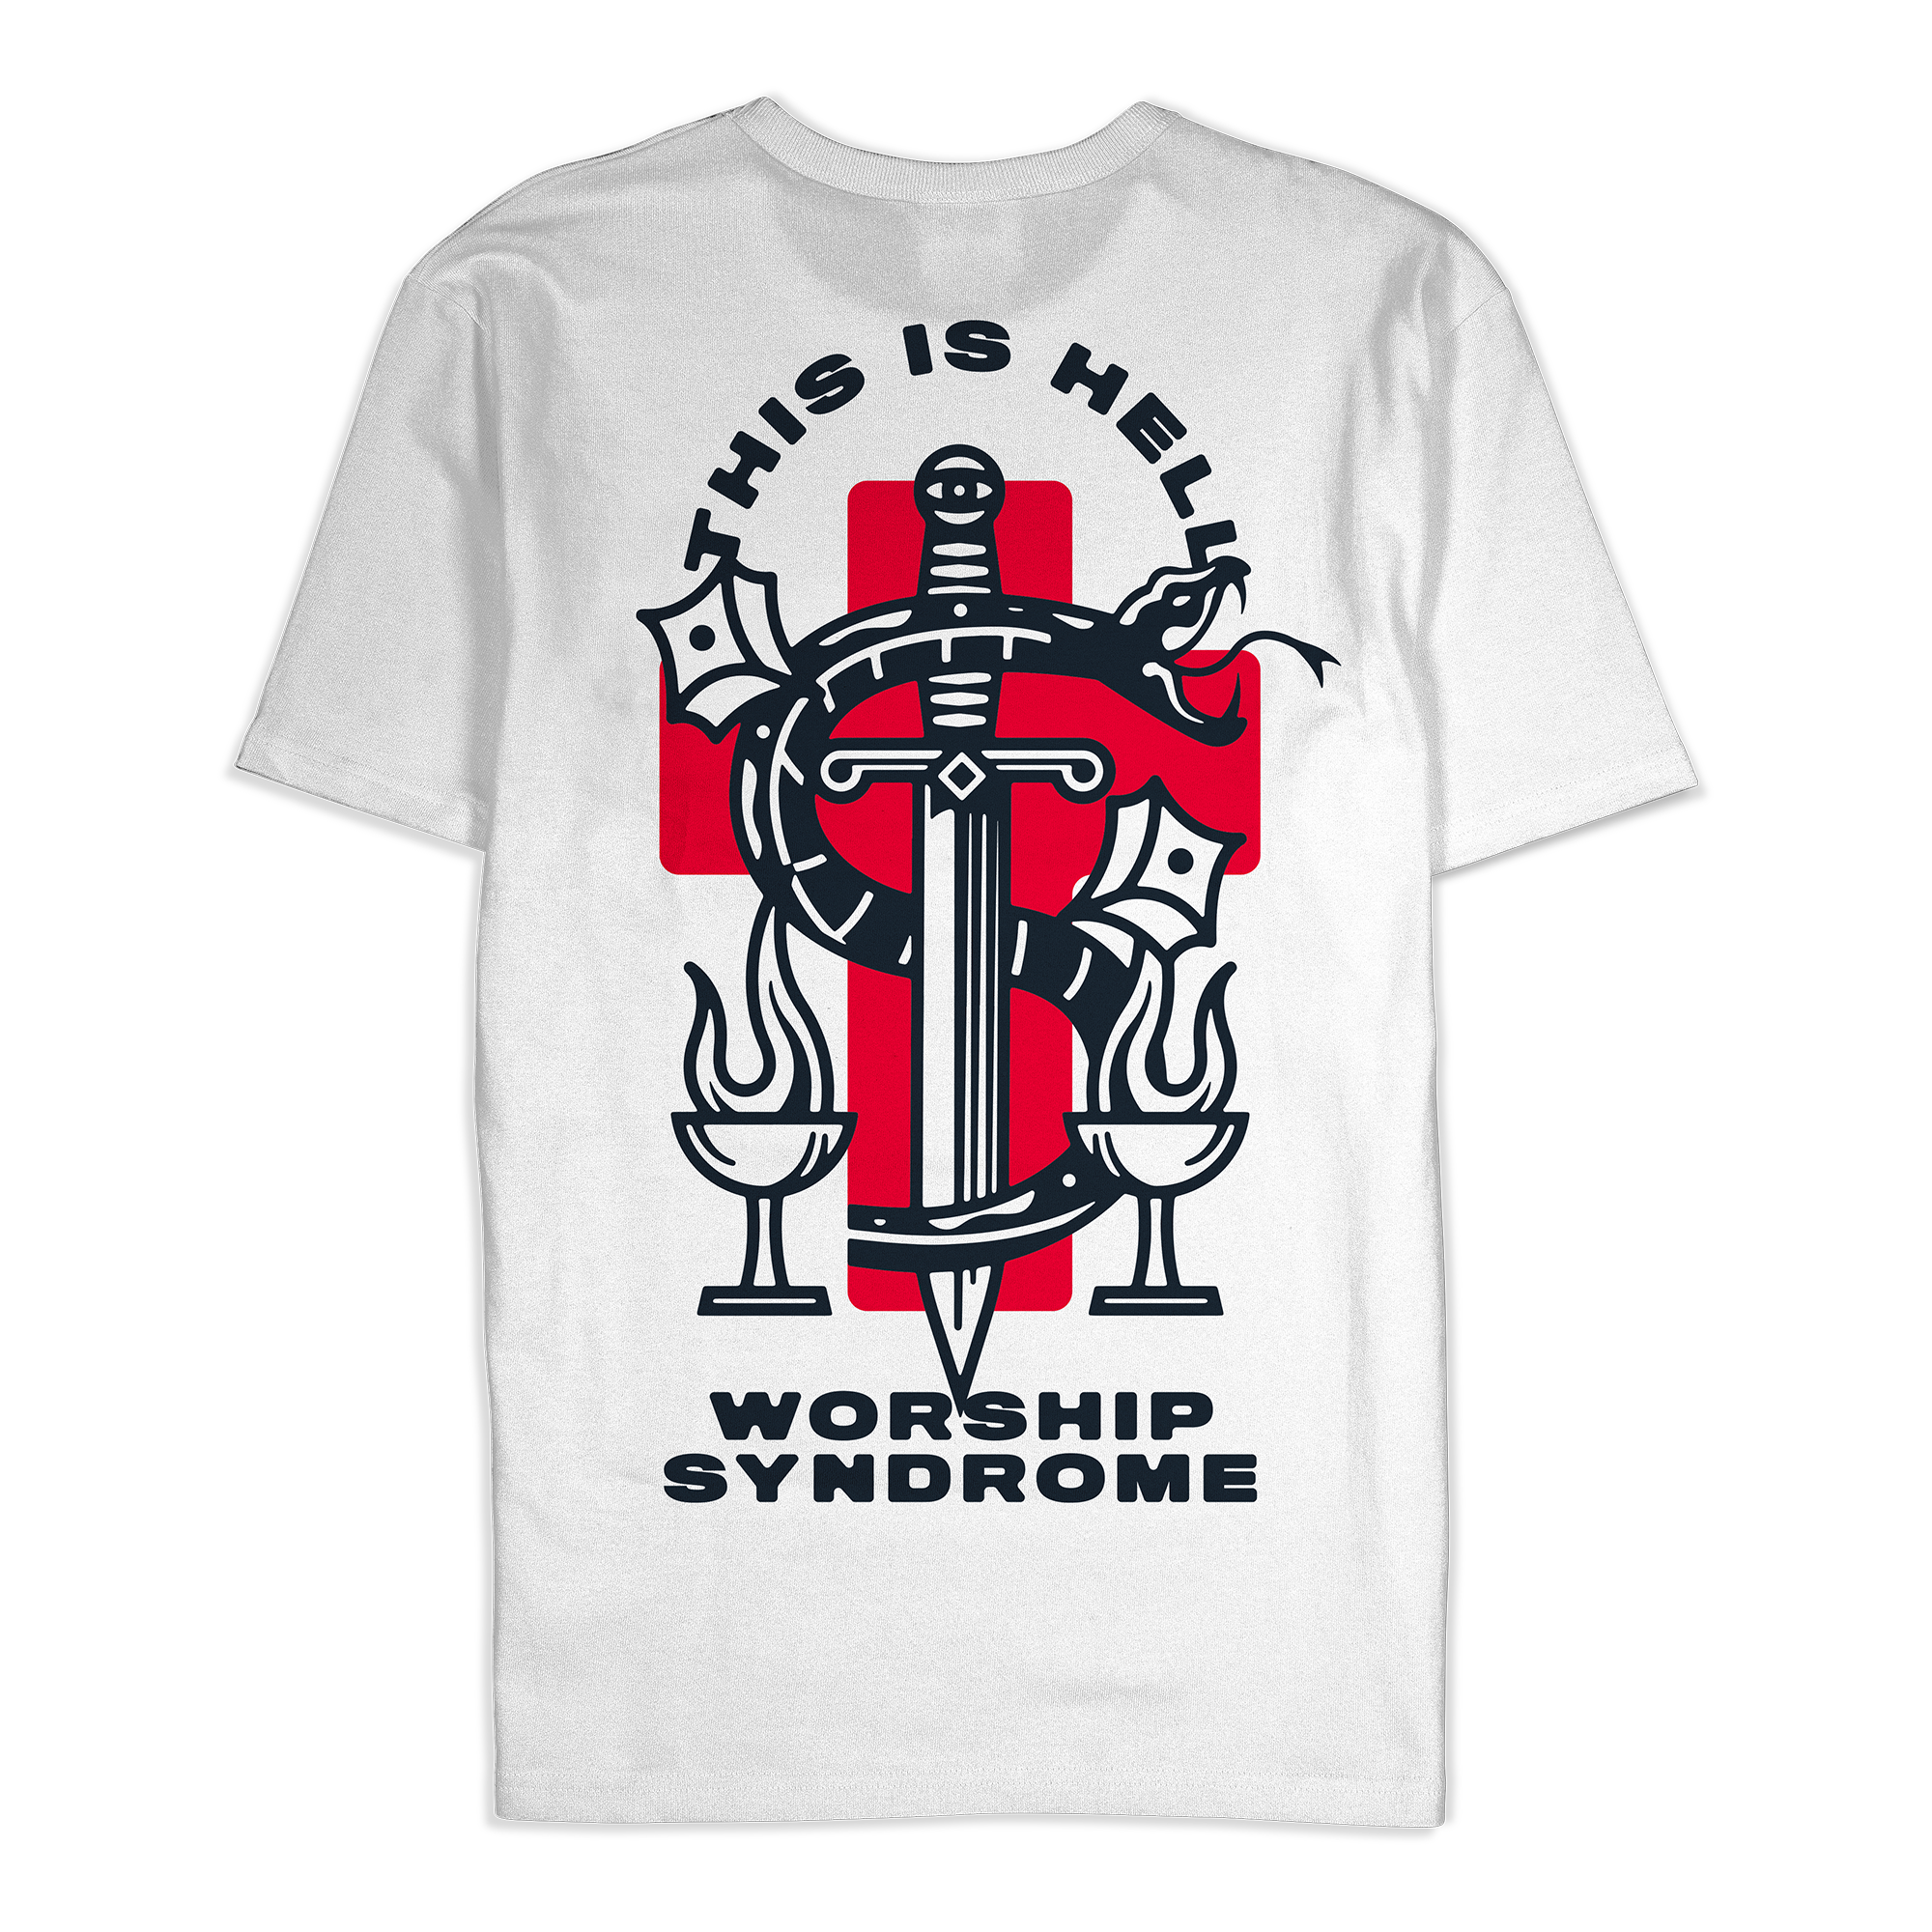 This Is Hell - Worship Syndrome Shirt